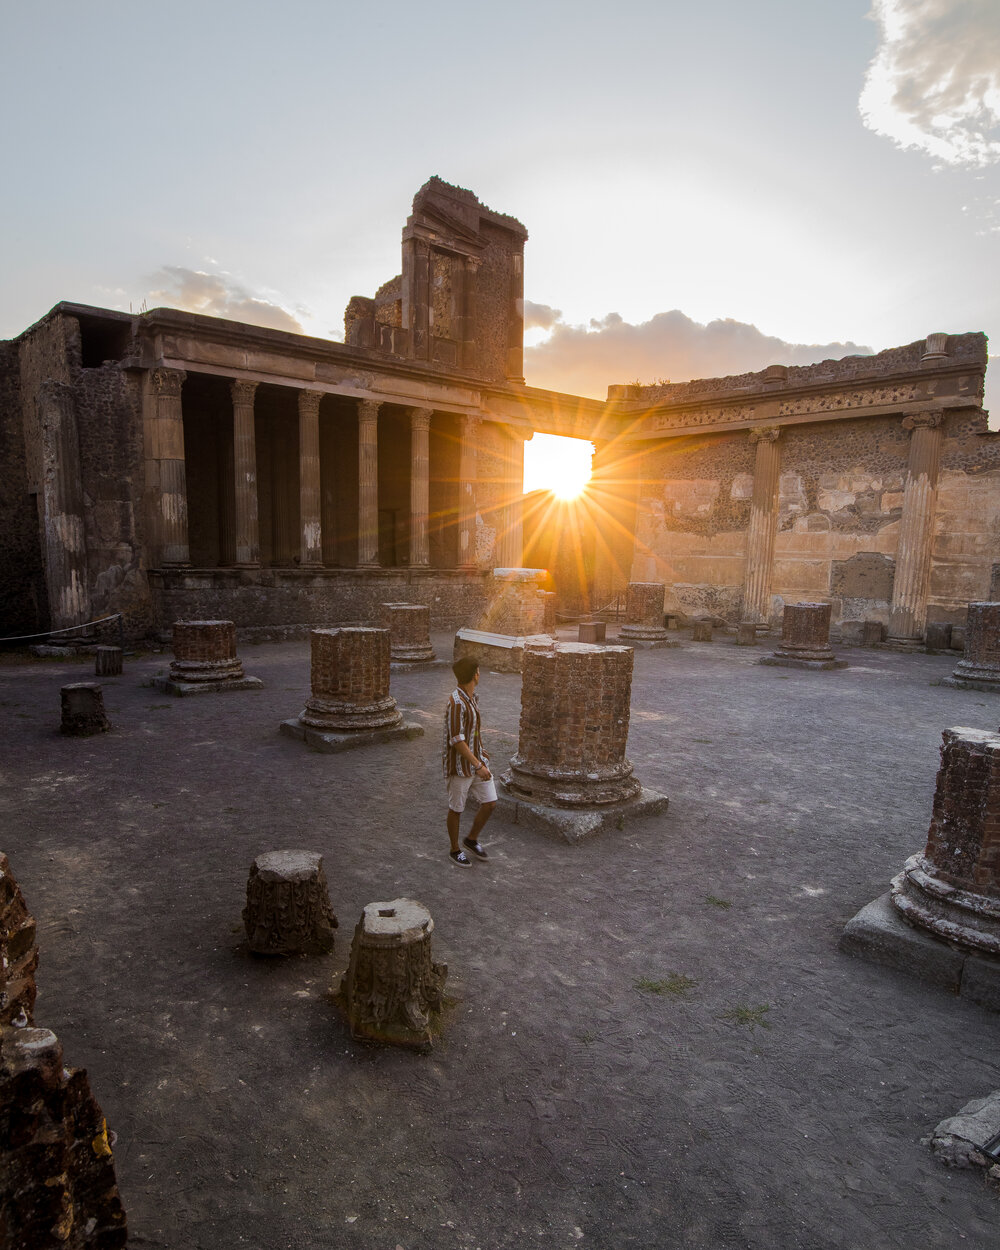  Explore the ruins in nearby Pompeii, an ancient city destroyed by the eruption of Mount Vesuvius in AD 79 